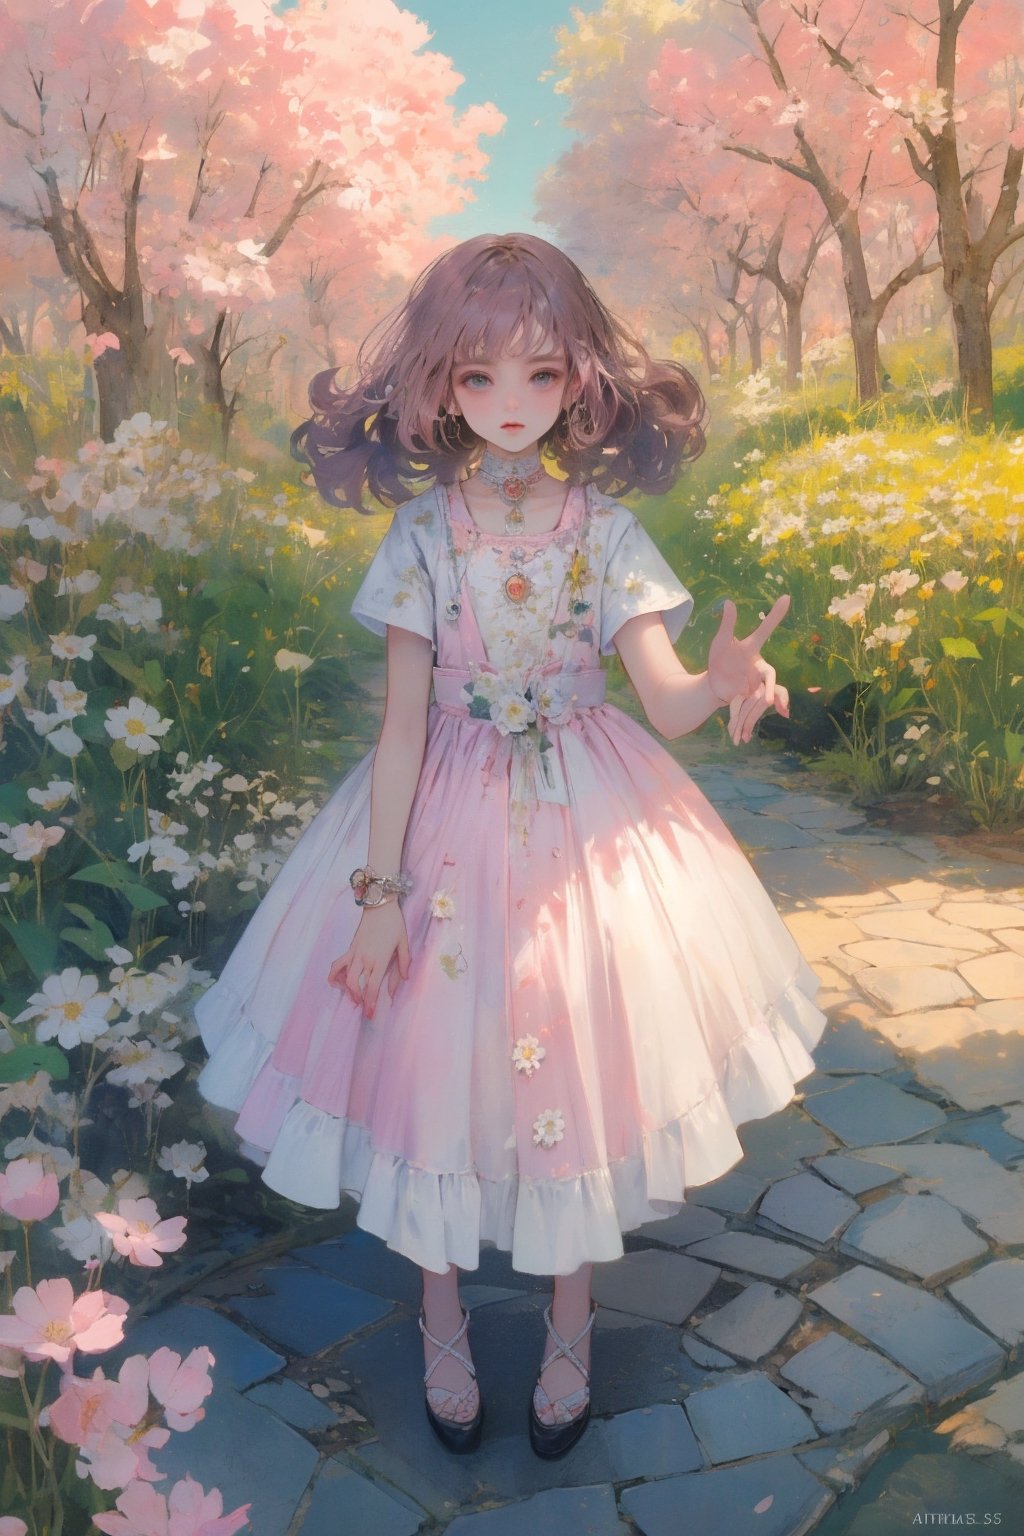 a noble little girl wearing a pink dress and a daisy tiptoes towards a boy with curly hair, reaching out a delicate rose in a thornless stem, standing on cobblestone pavement, under a cloudless sky, with a row of blooming cherry blossom trees in the background, captured with a Canon EOS 5D Mark IV camera, 50mm lens, medium shot focusing on the girl’s tender gesture, in a style reminiscent of a romantic oil painting by Thomas Kinkade. ,midjourney,Anitoon2